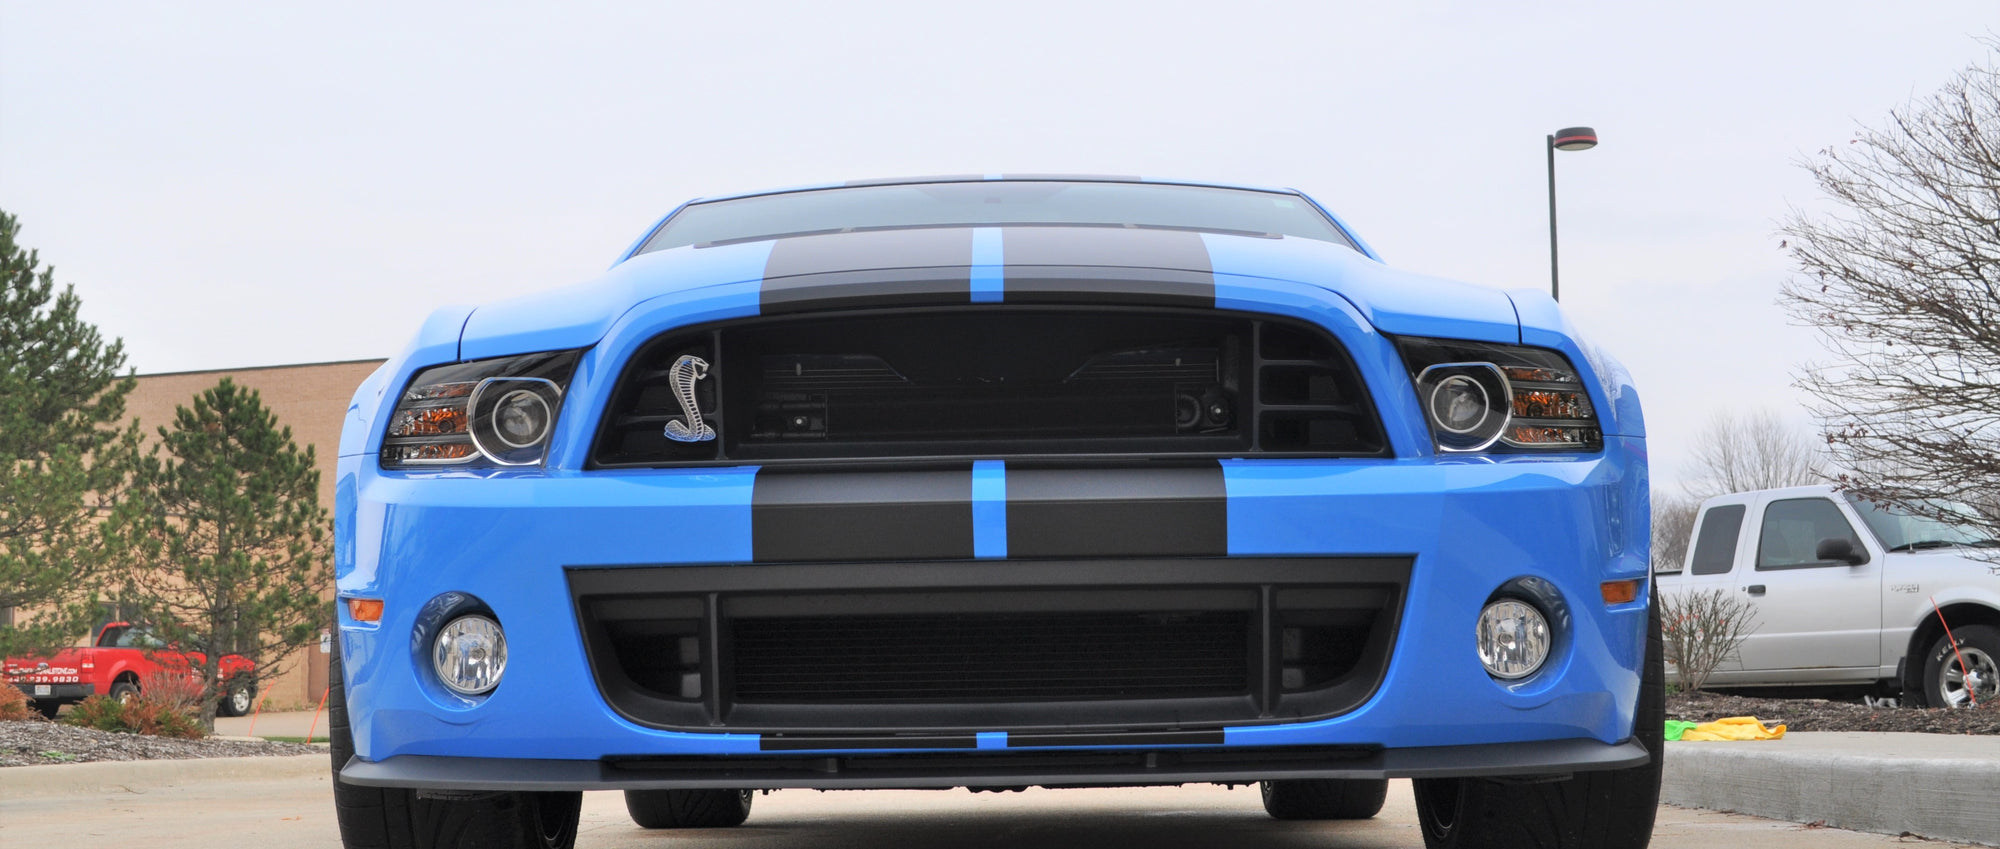 2011 Ford Mustang Shelby GT500 5.8L V8